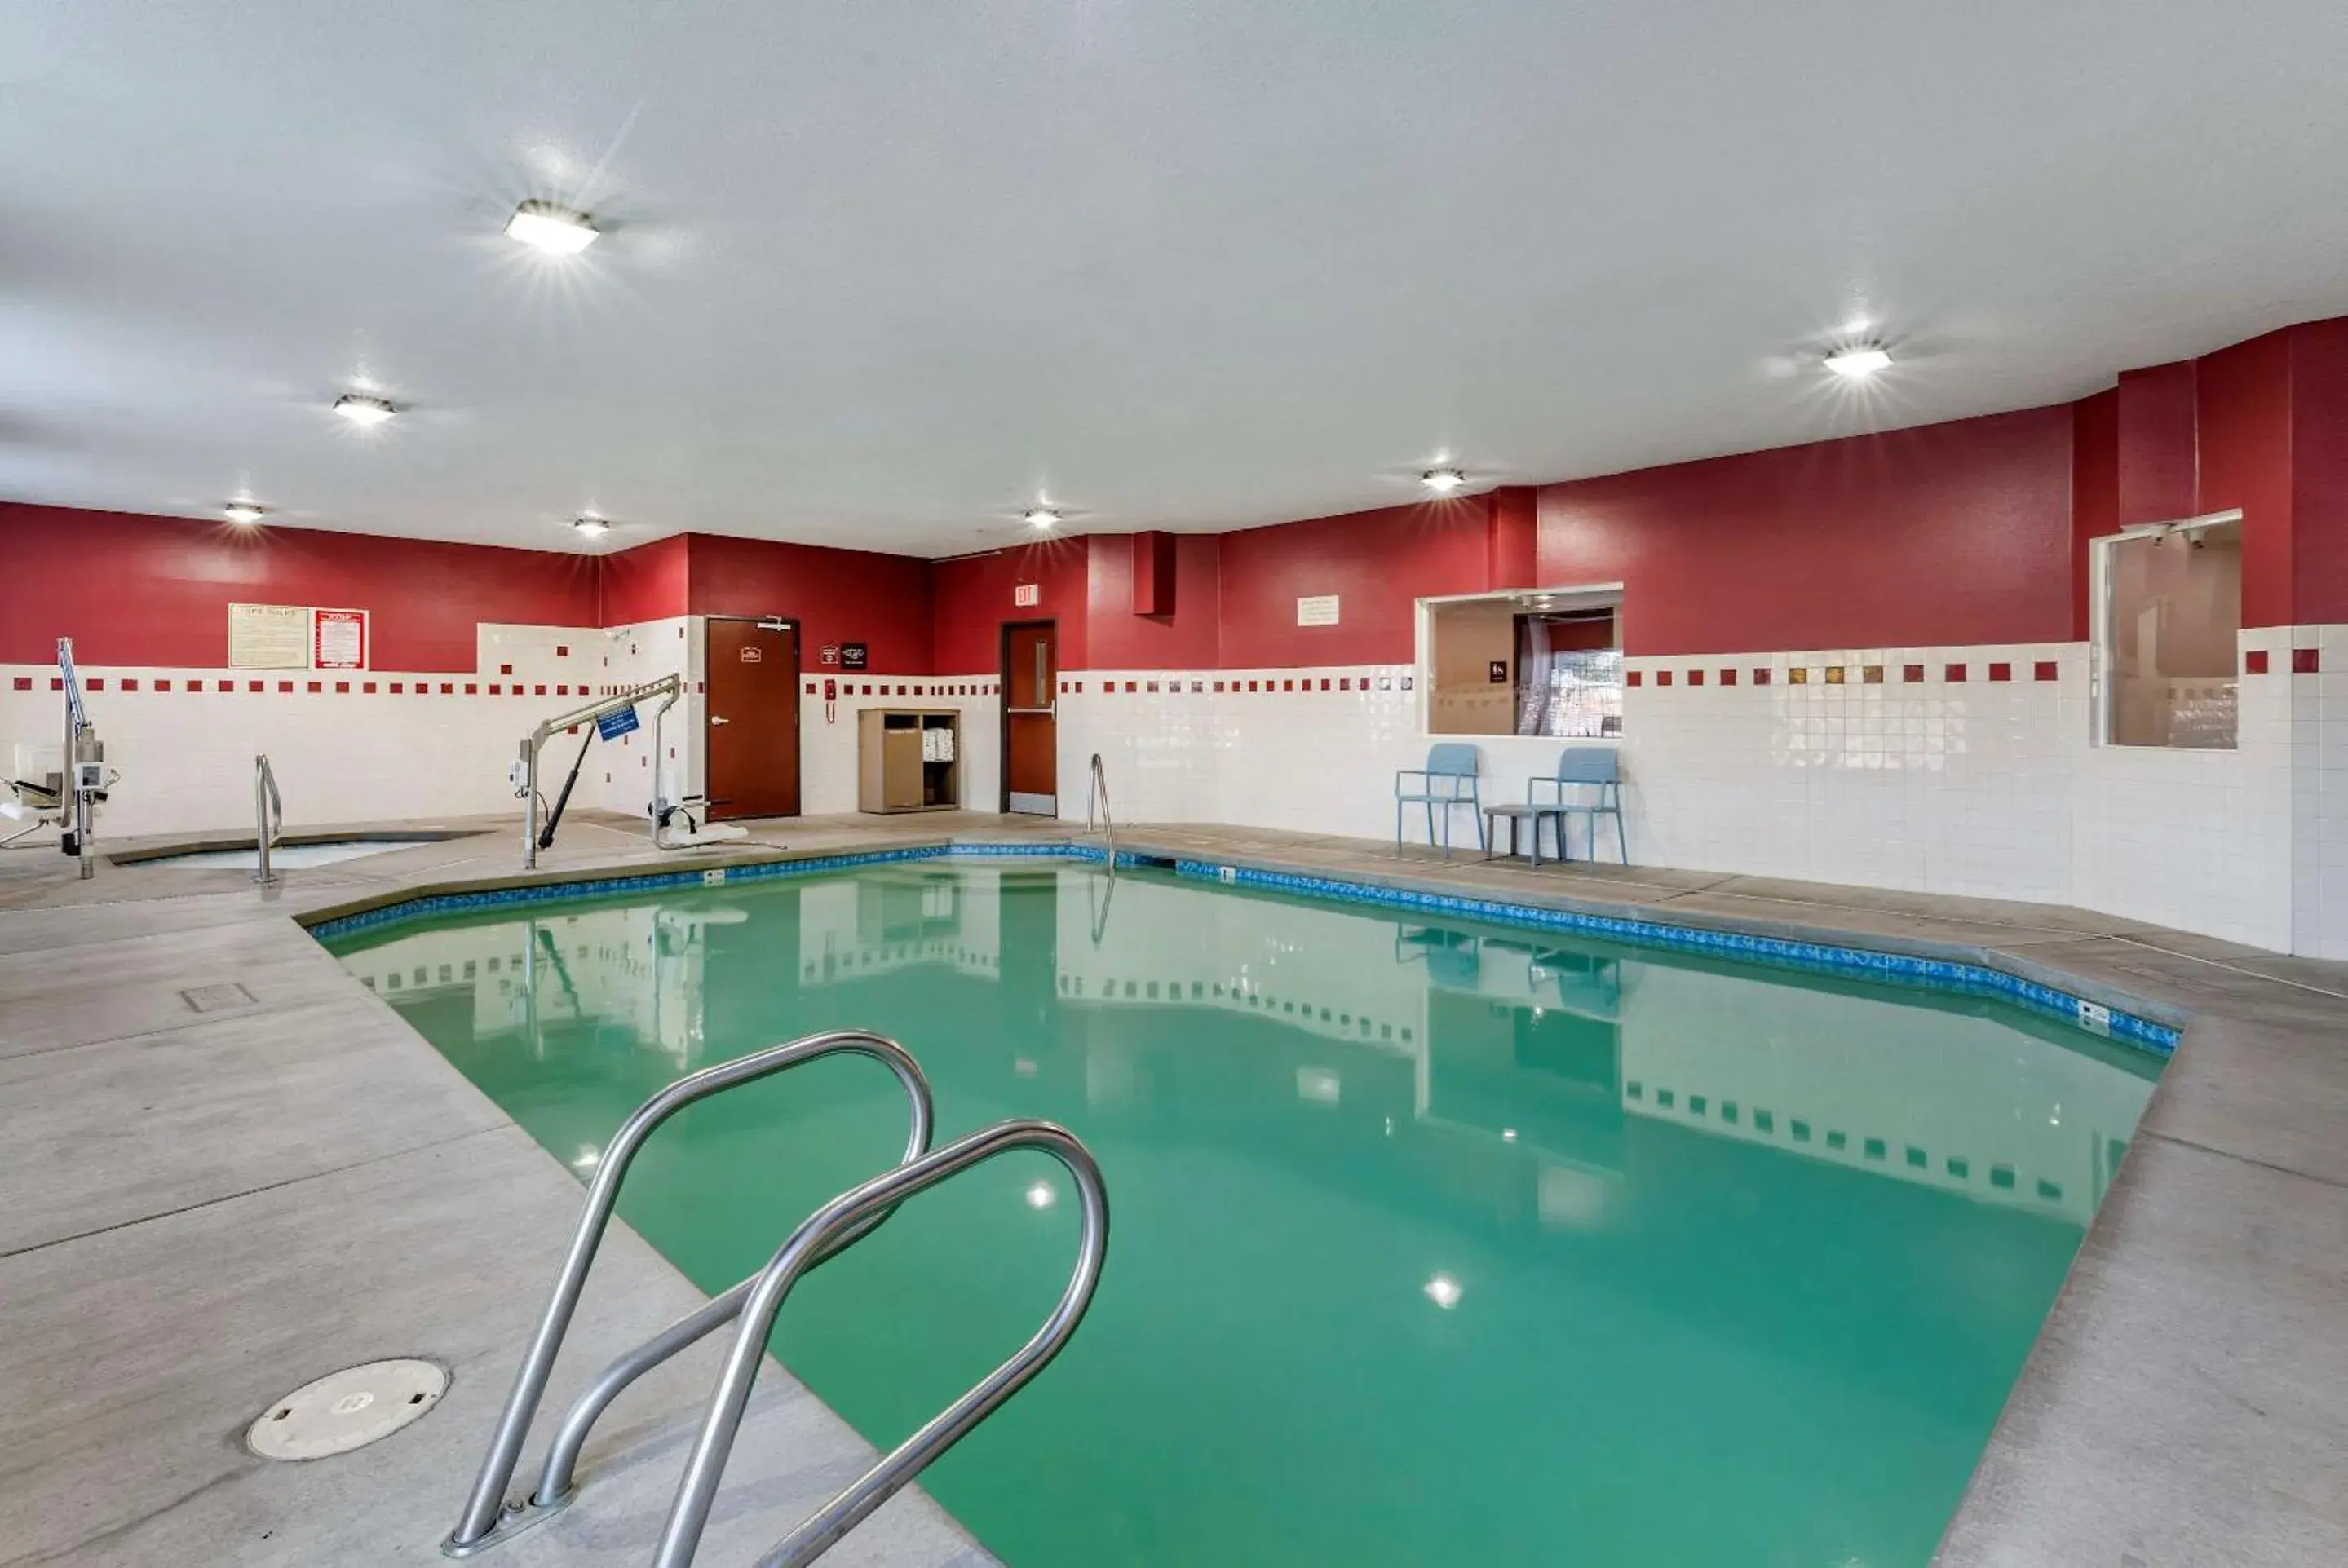 Activities, Swimming Pool in Comfort Inn Portland near I-84 and I-205